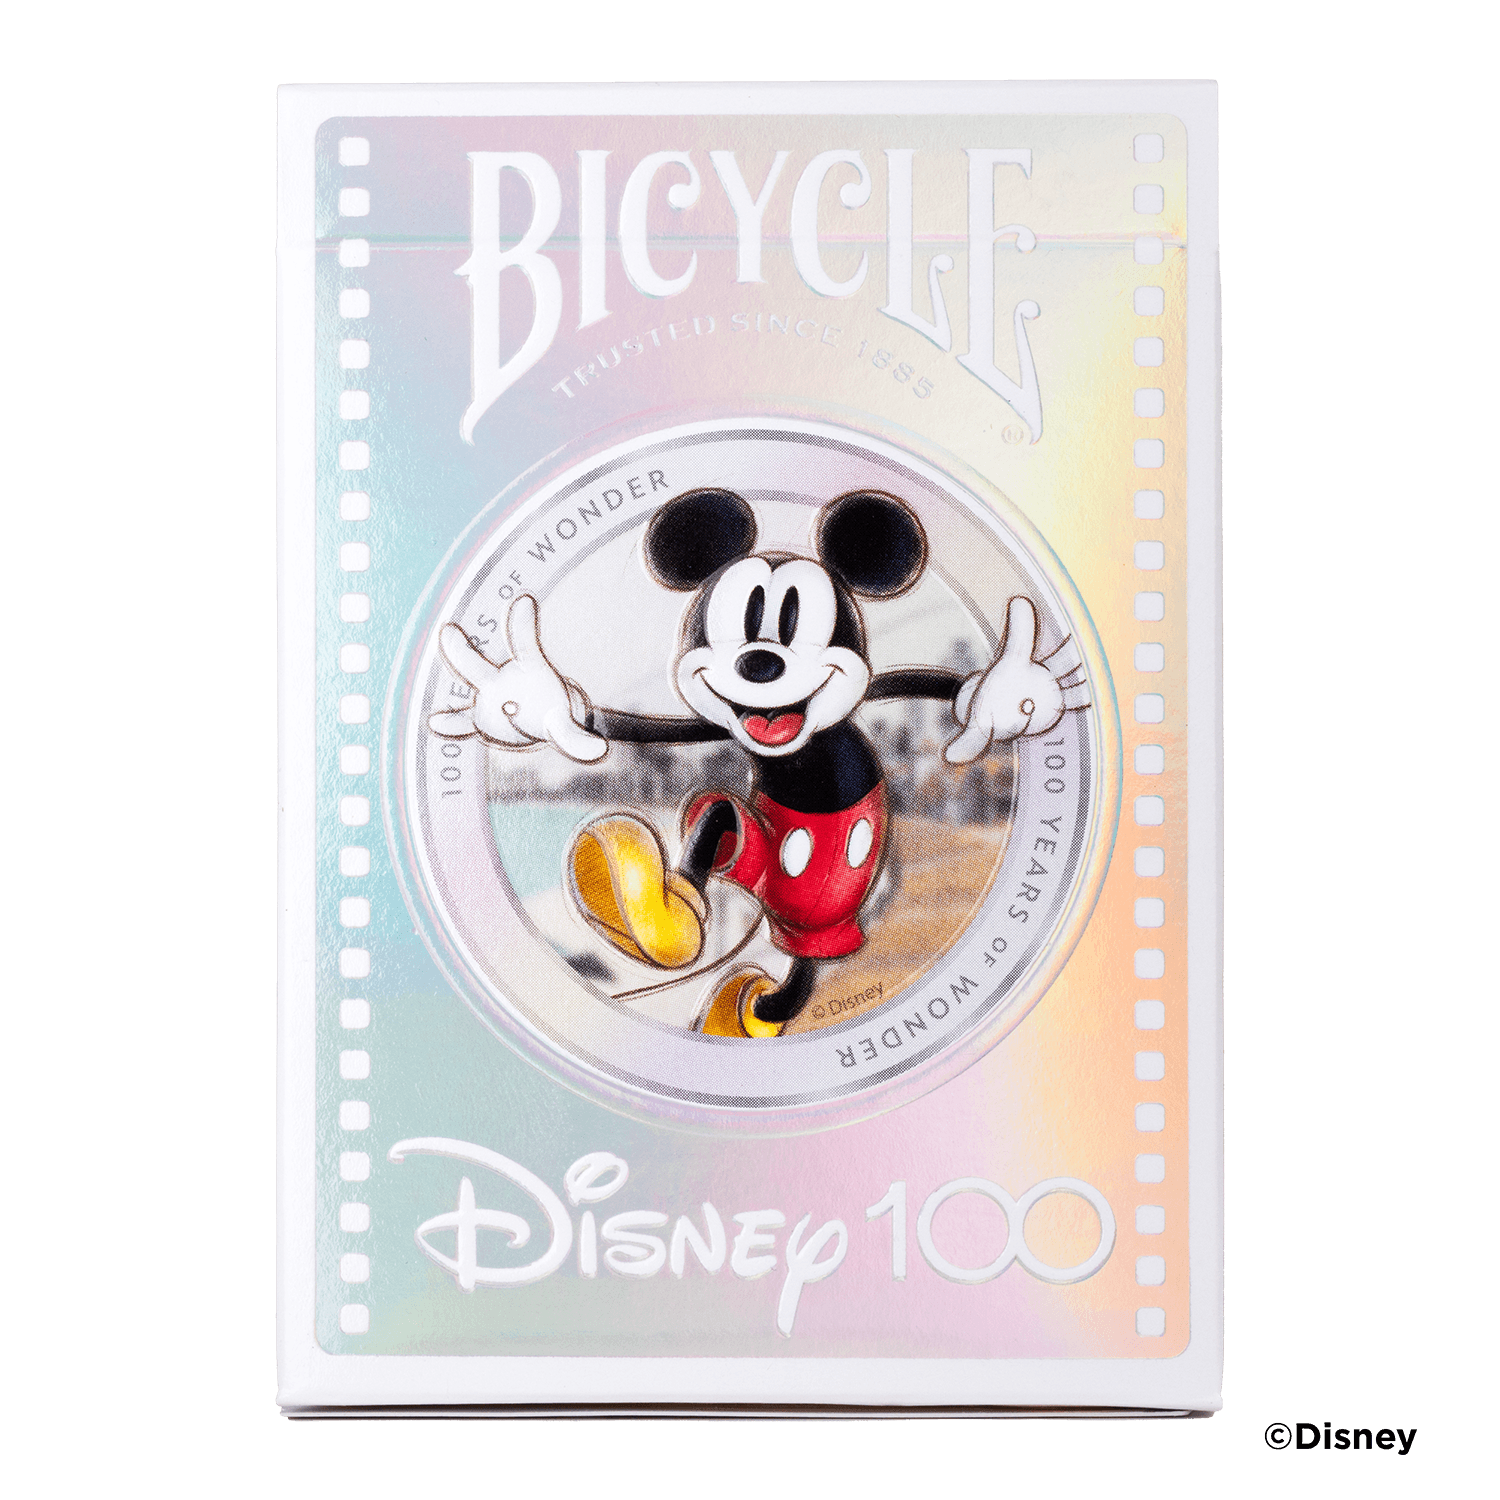 Bicycle Disney 100 Anniversary Inspired Playing Cards